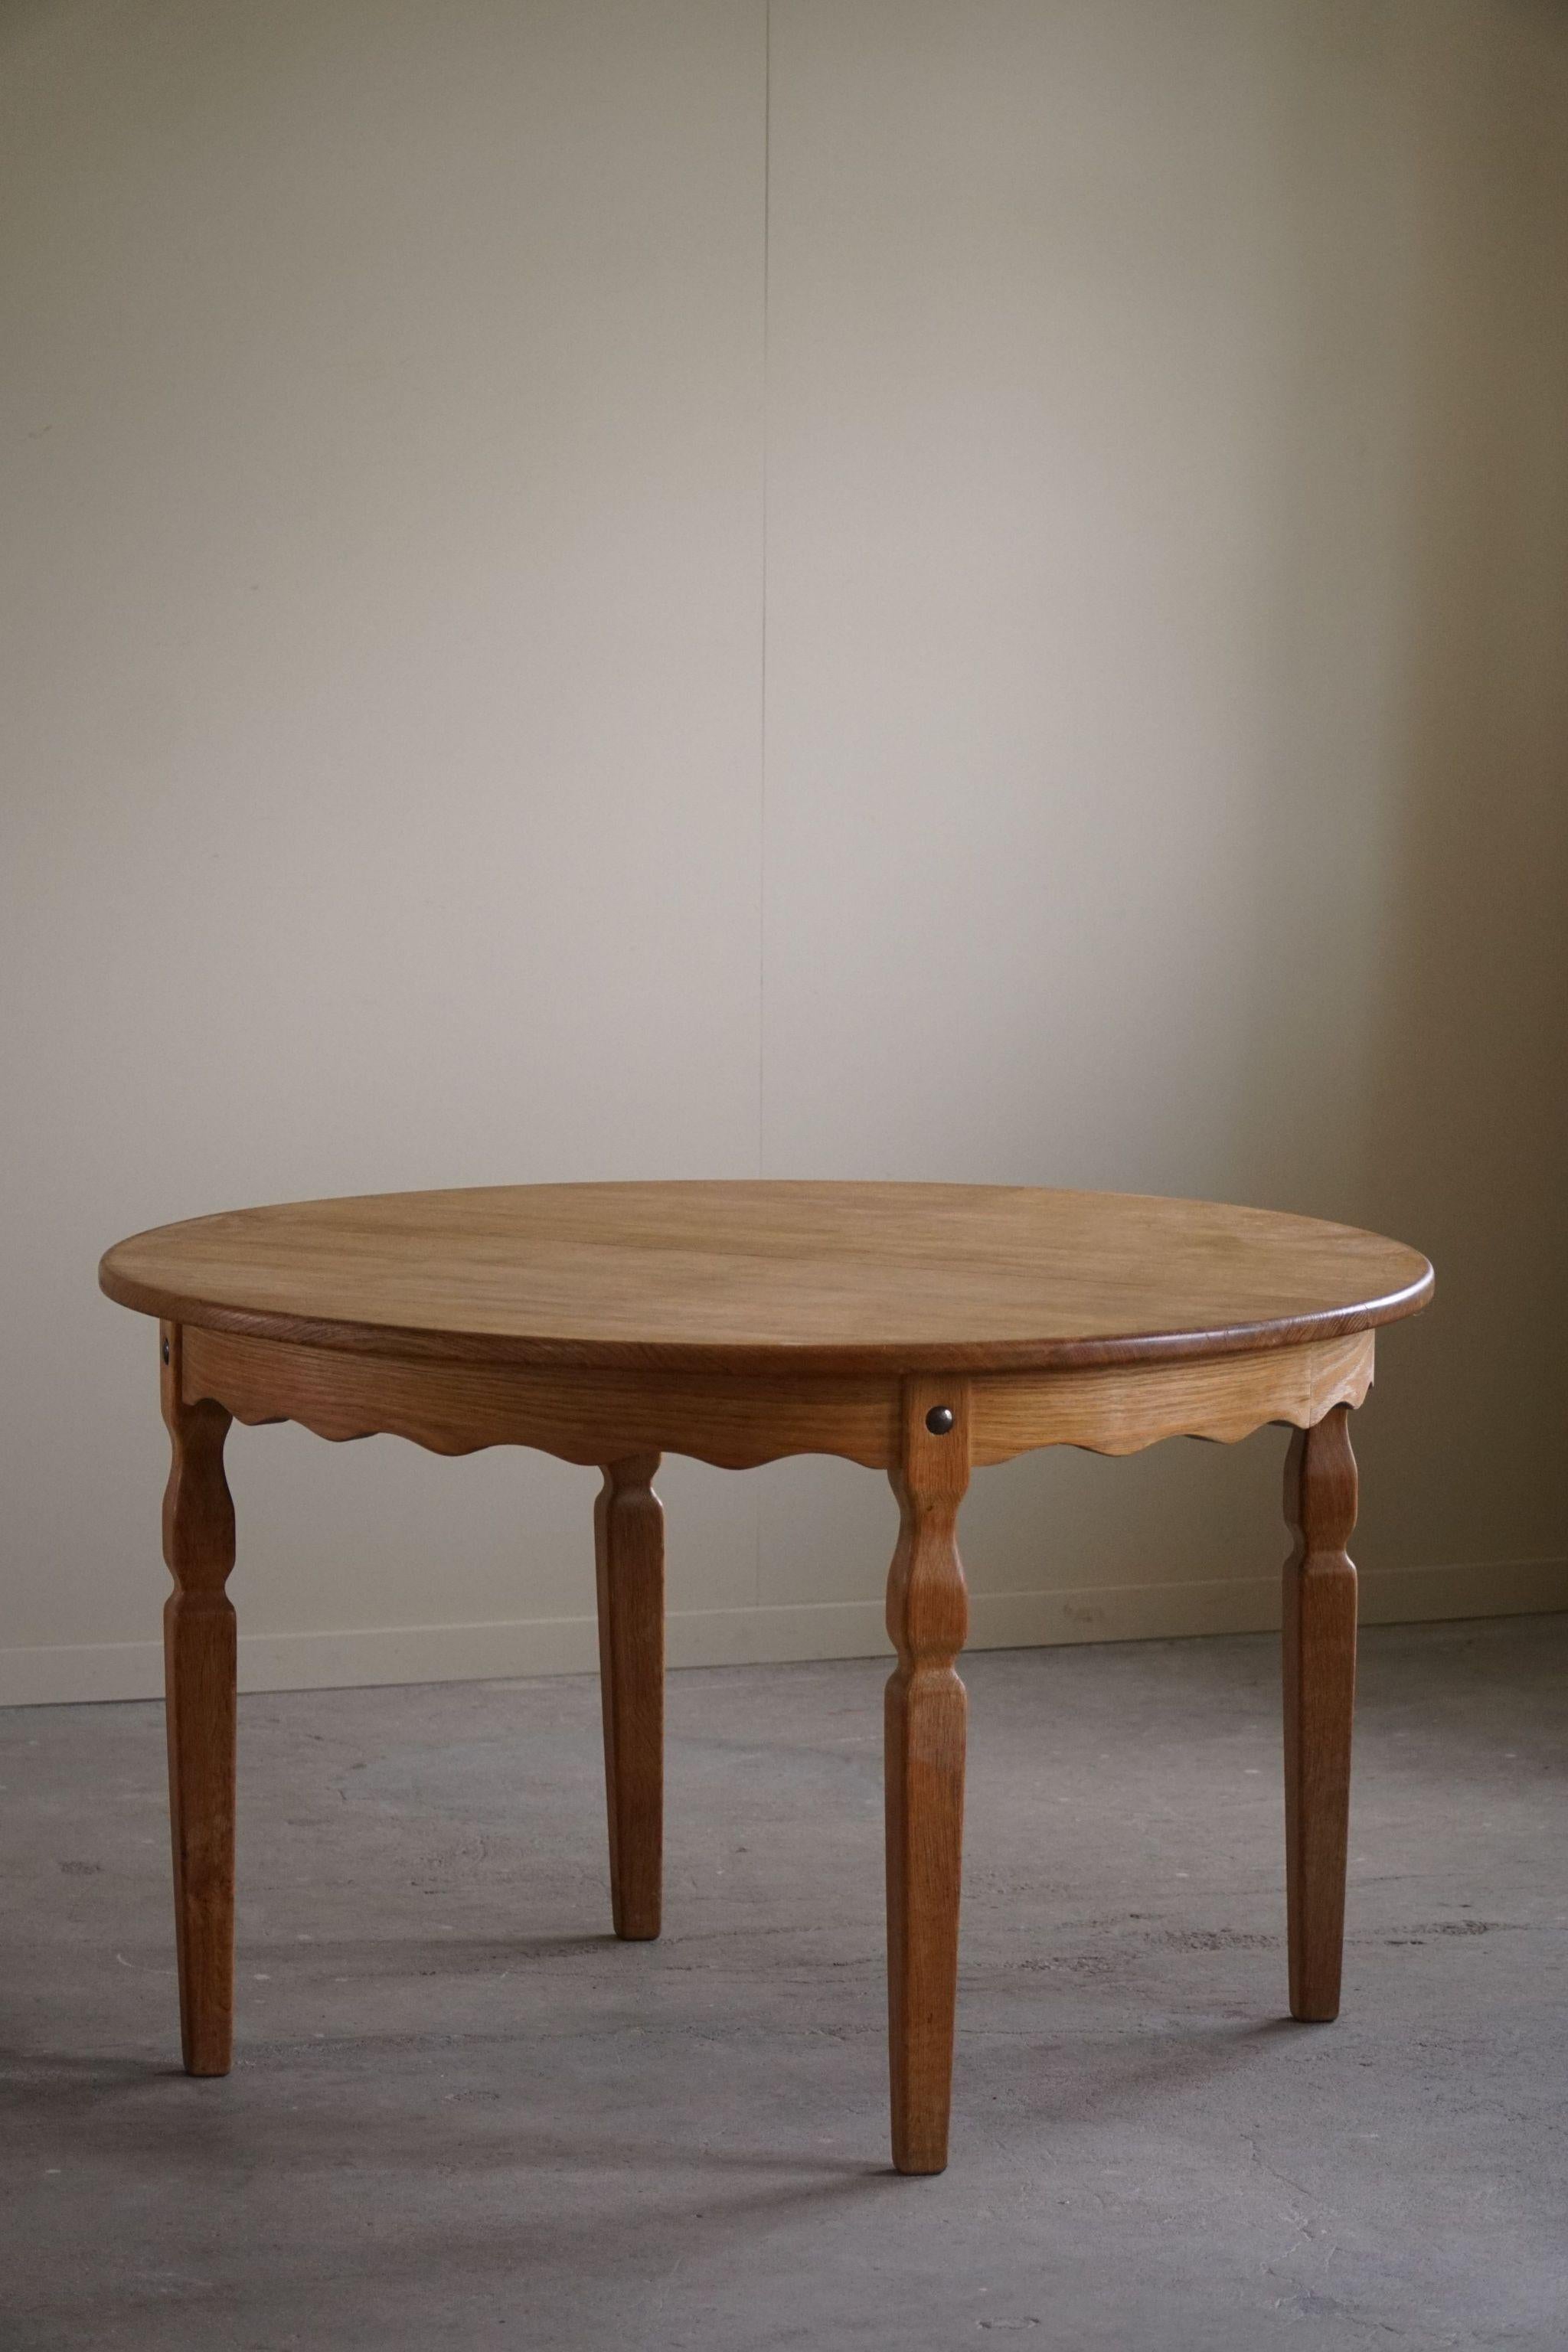 Danish Modern, Round Dining Table in Oak with Two Extensions, Mid Century, 1960s For Sale 4